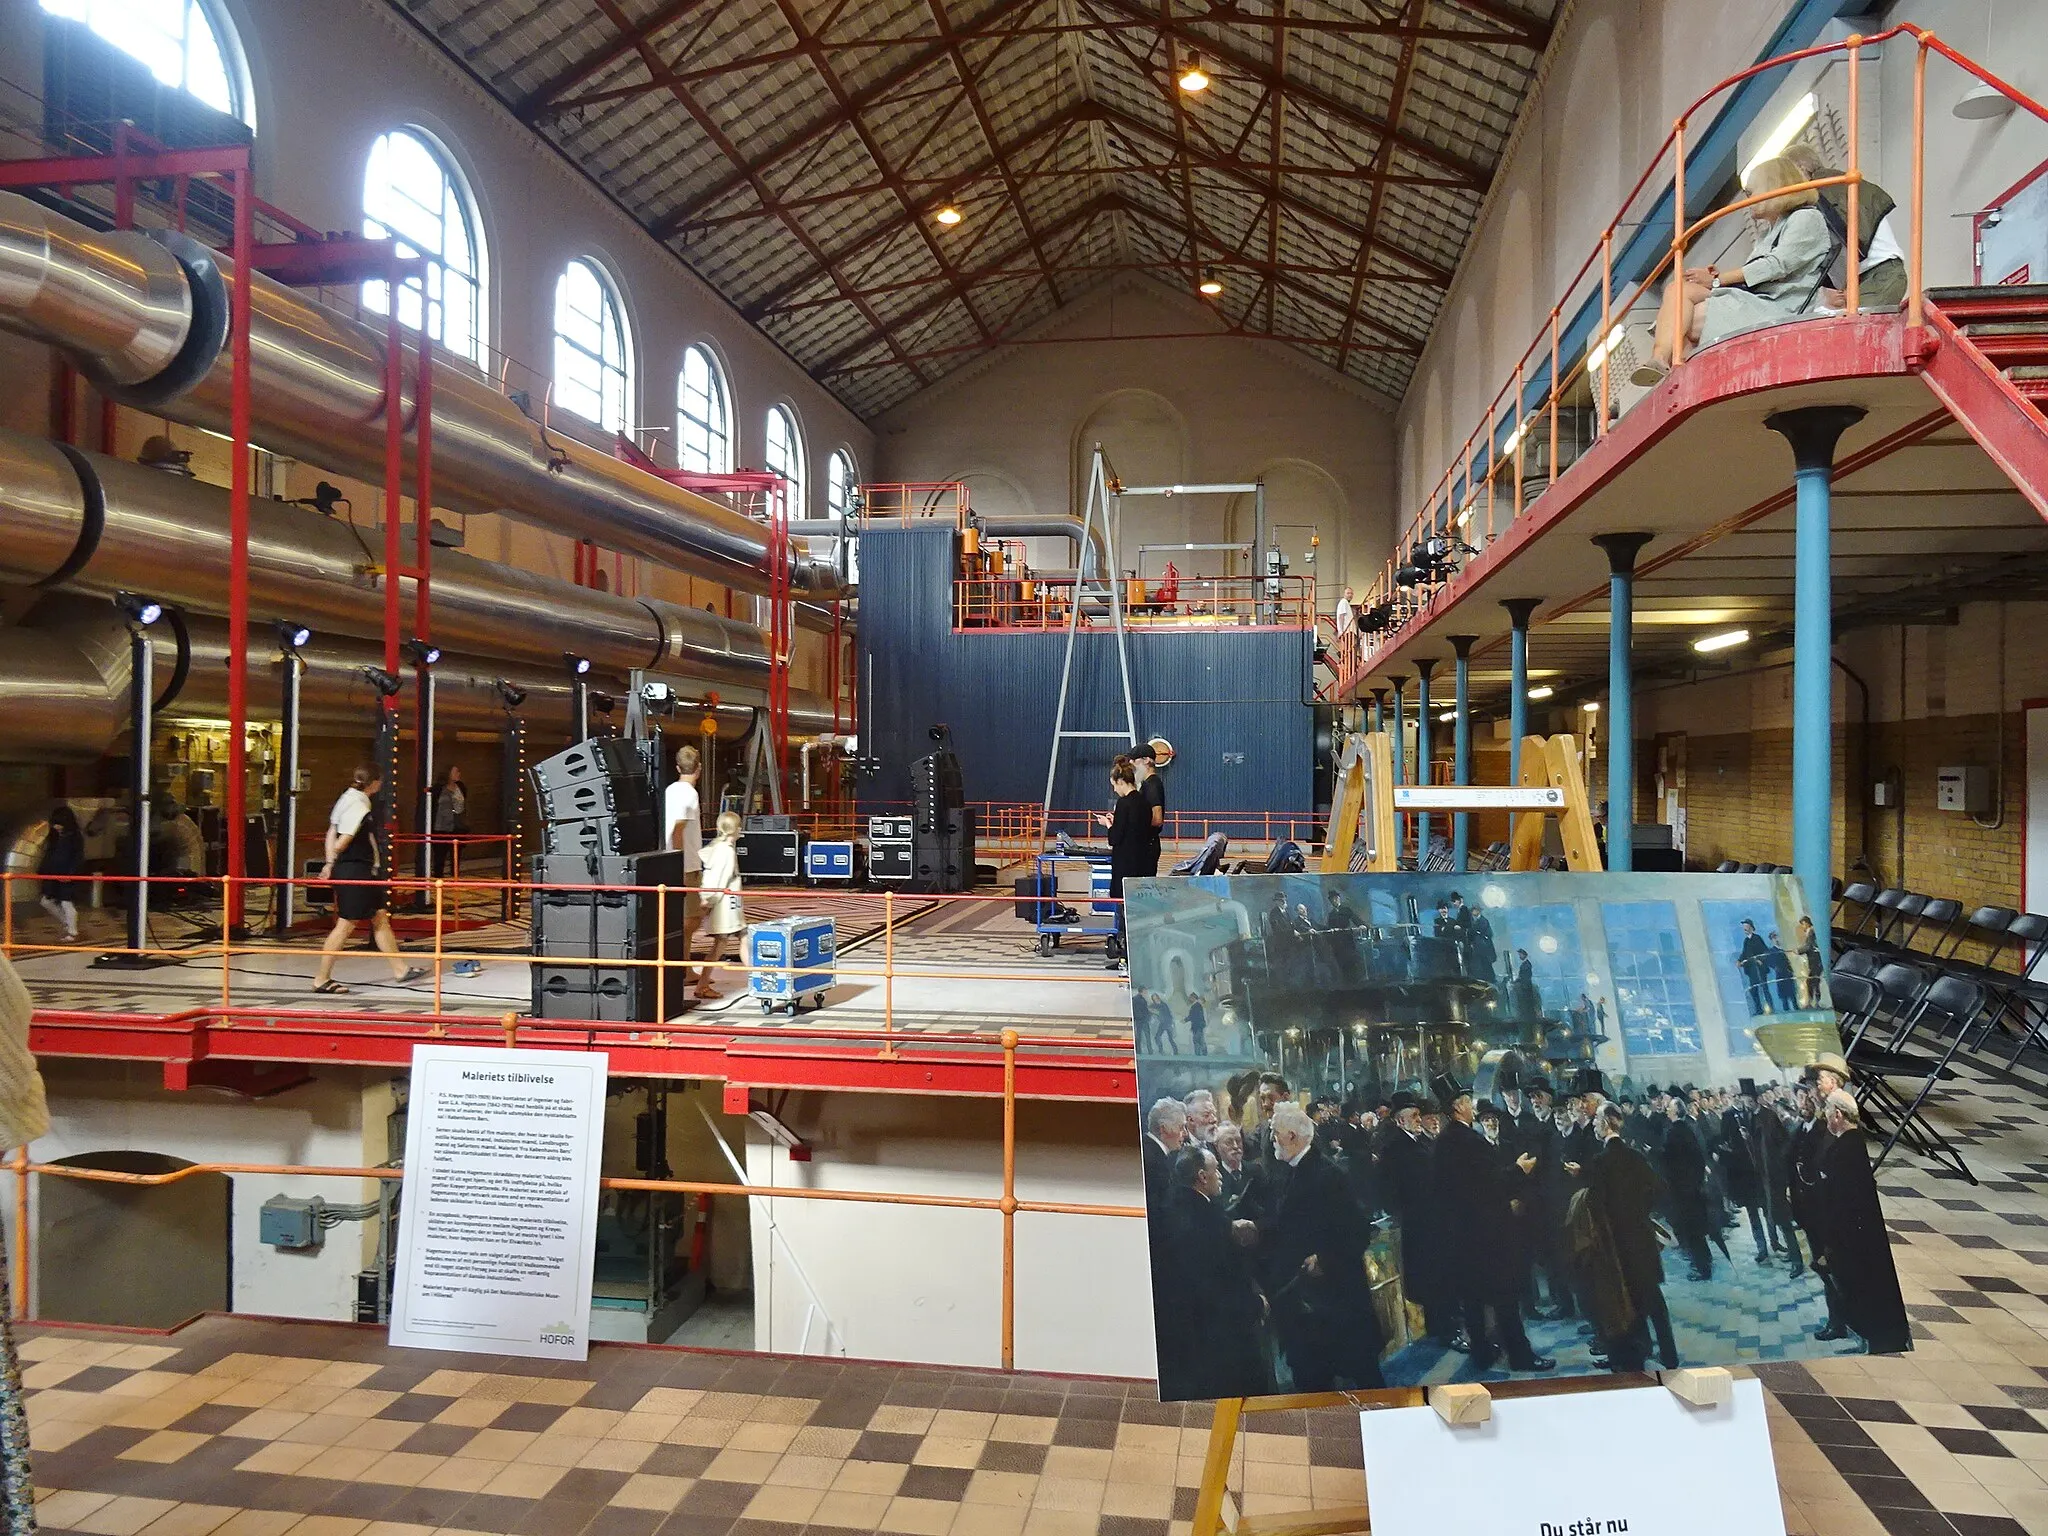 Photo showing: In 1903-1904 P. S. Krøyer (1851-1909) made the group painting "Industriens Mænd" (The Men of Industry) with the interior of the power plant Østre Elektricitetsværk in Copenhagen as the background. At an open days event in 2021 it was possible to see the place from his point of view. It has obvious changed somewhat in the meanwhile.